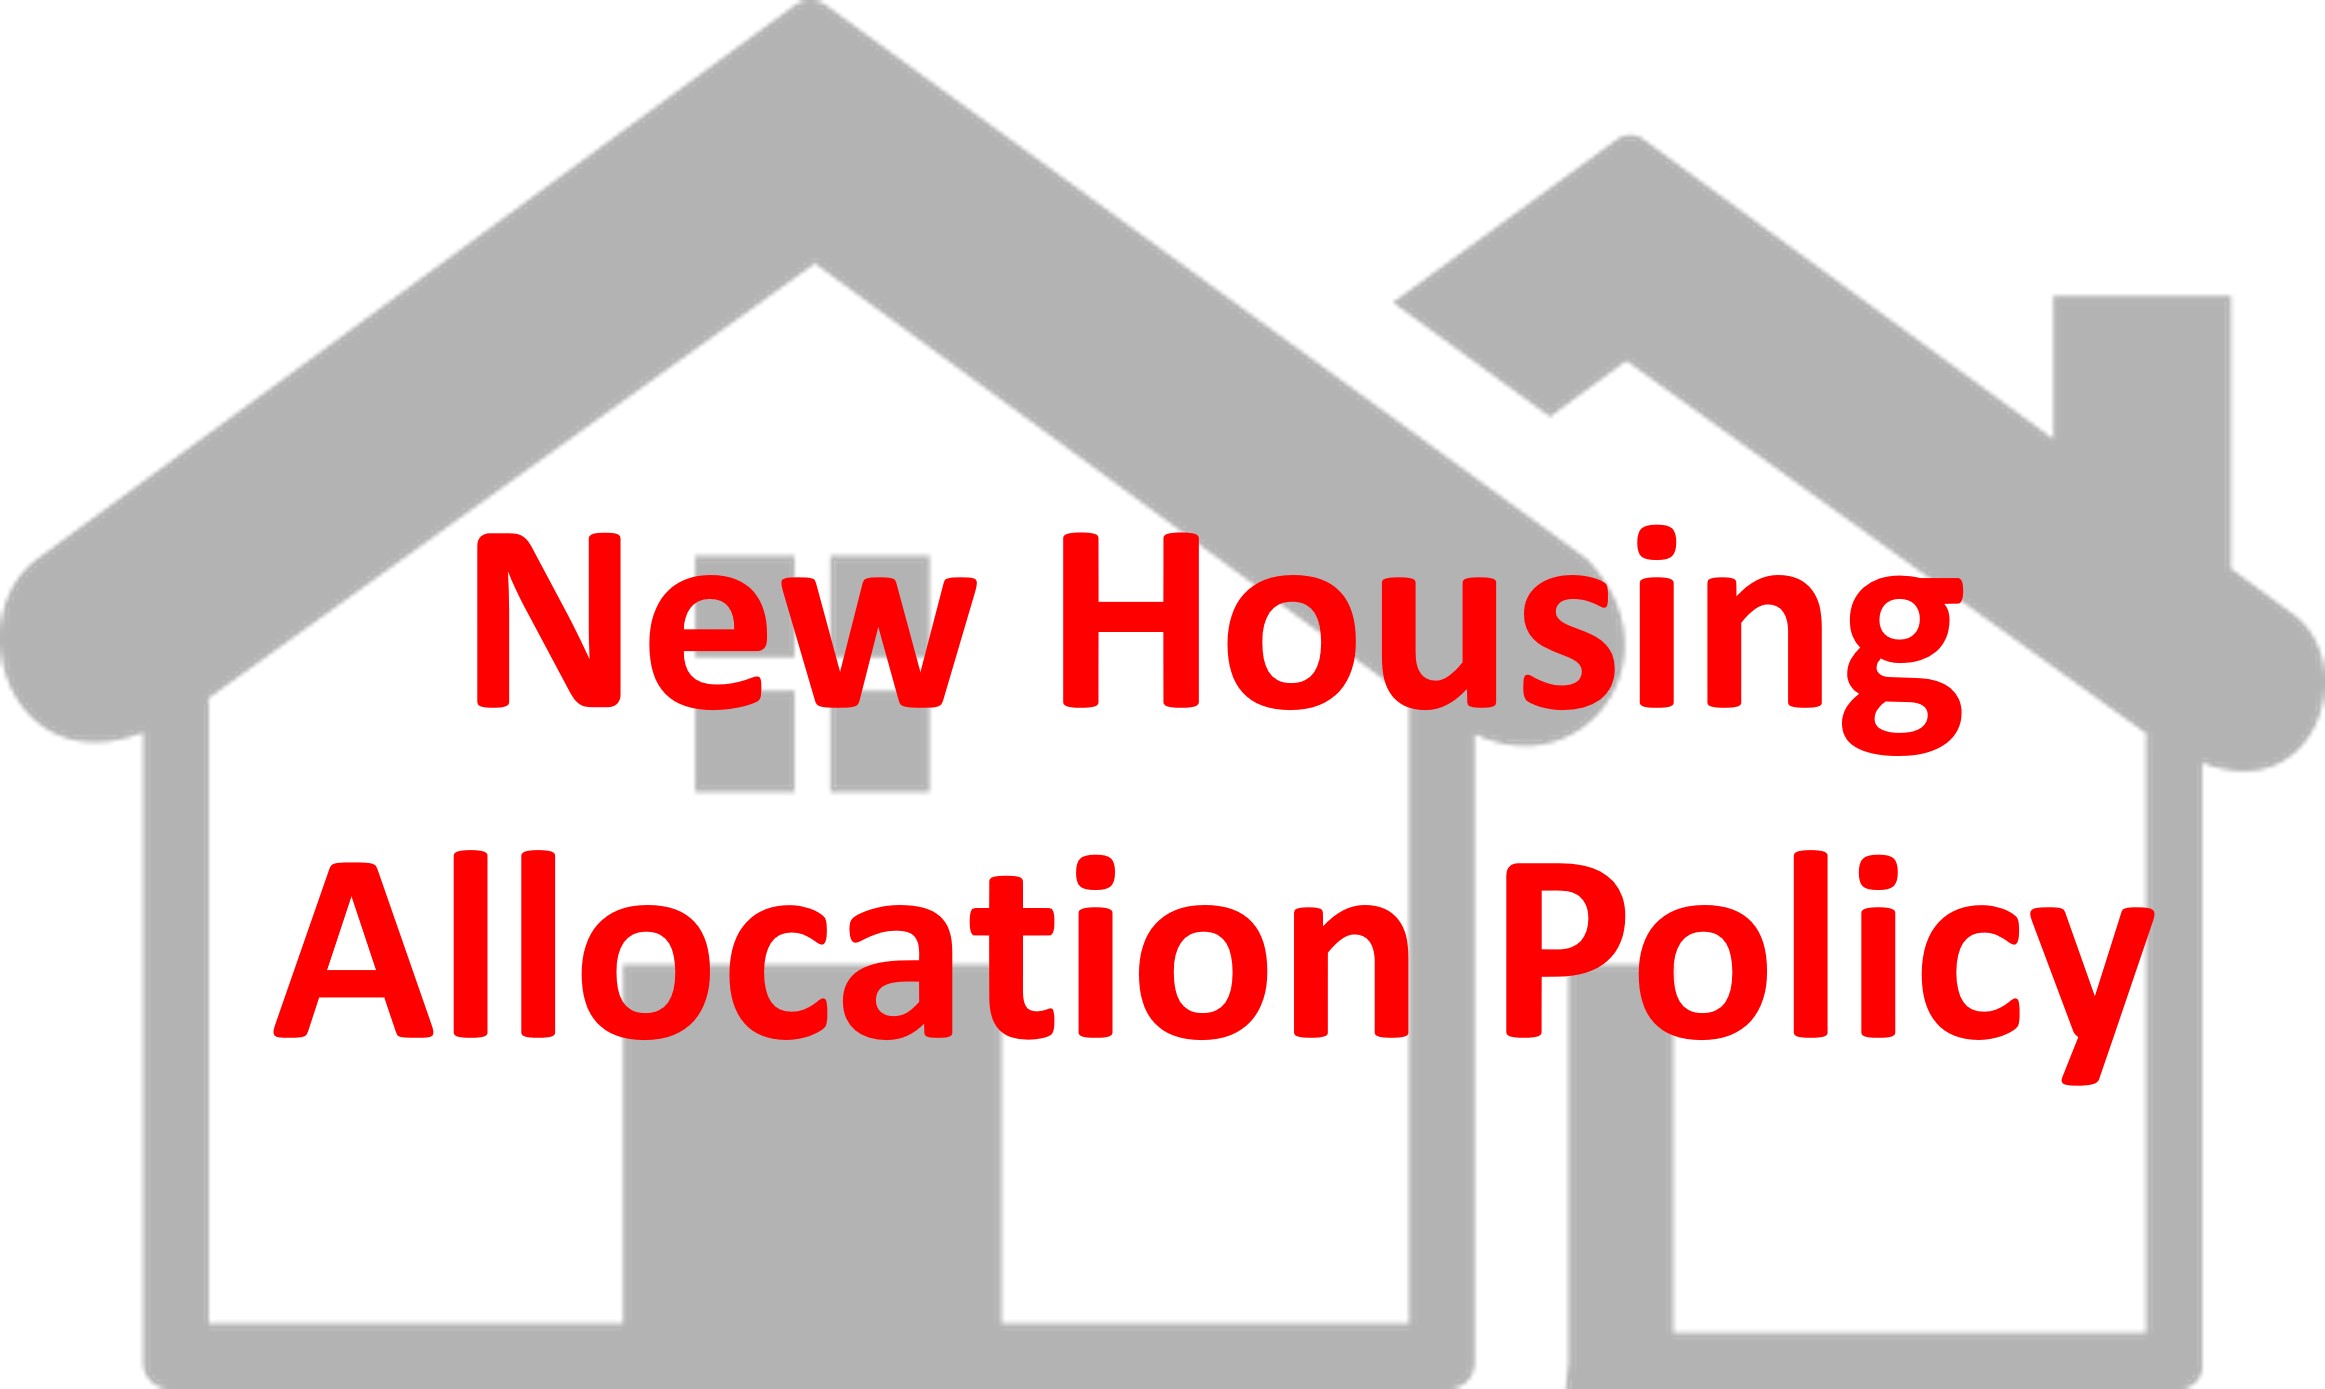 New Housing Allocation Policy